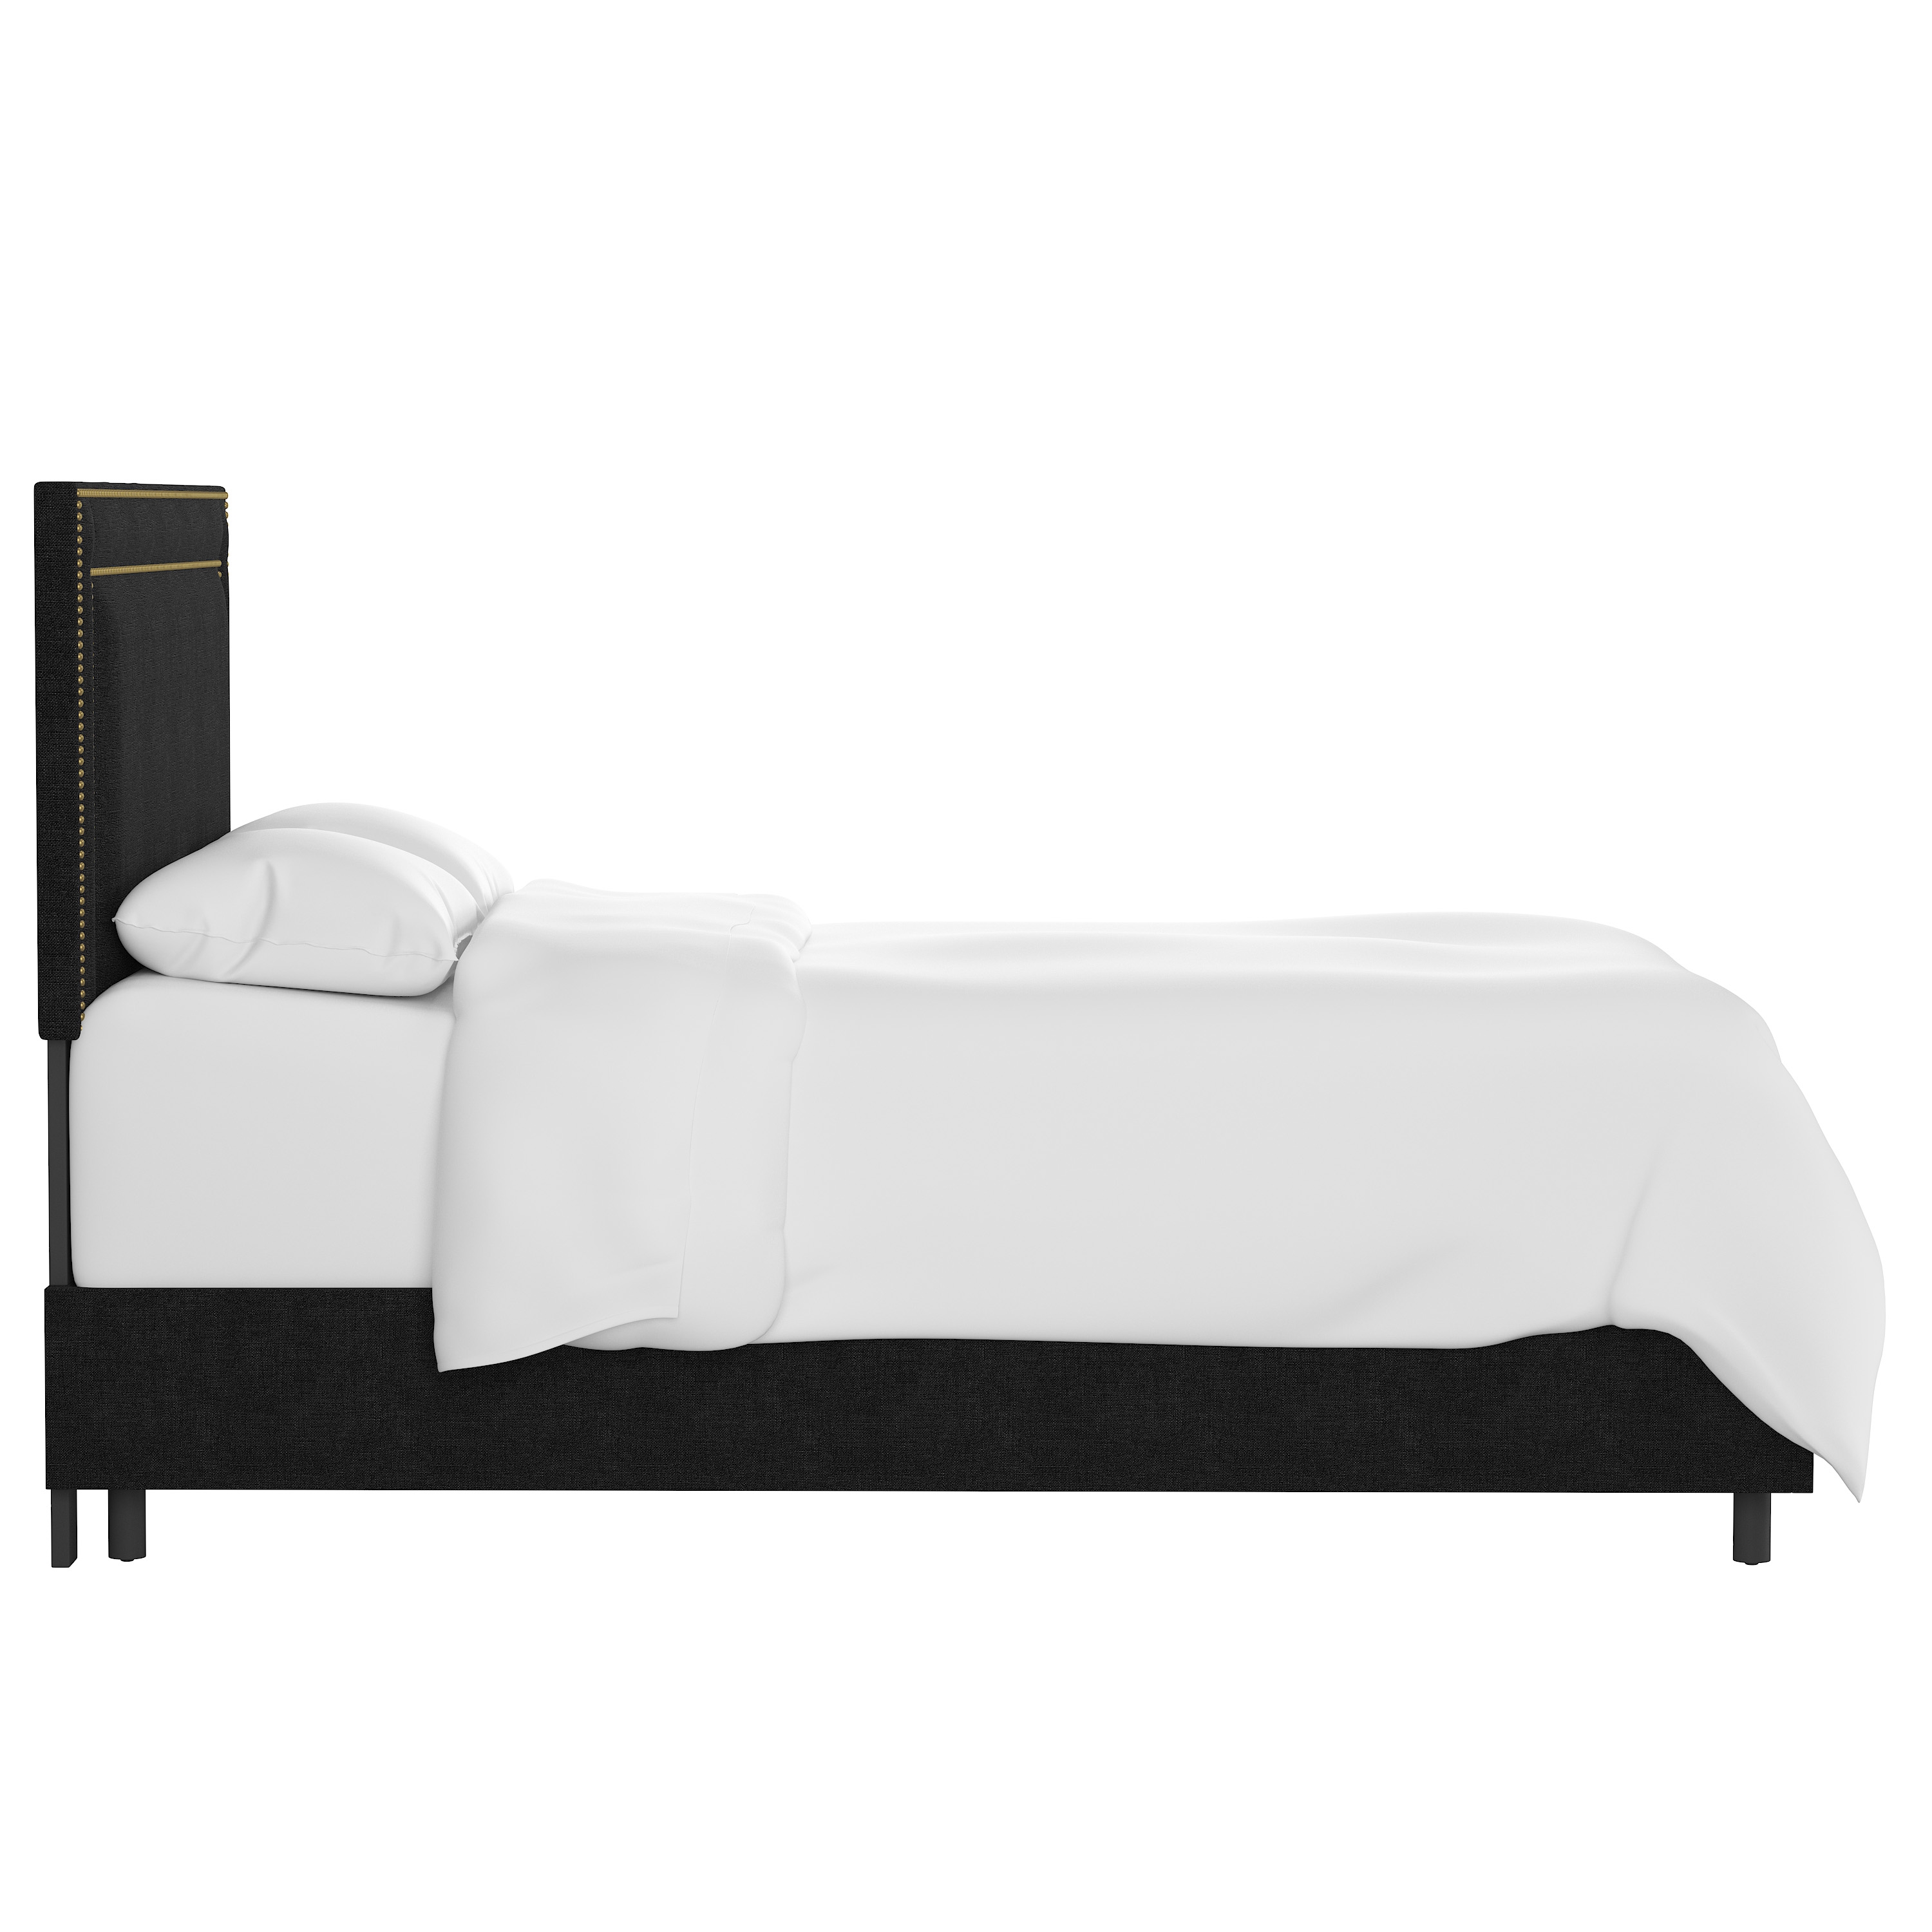 Williams Bed, Queen, Caviar, Brass Nailheads - Image 2